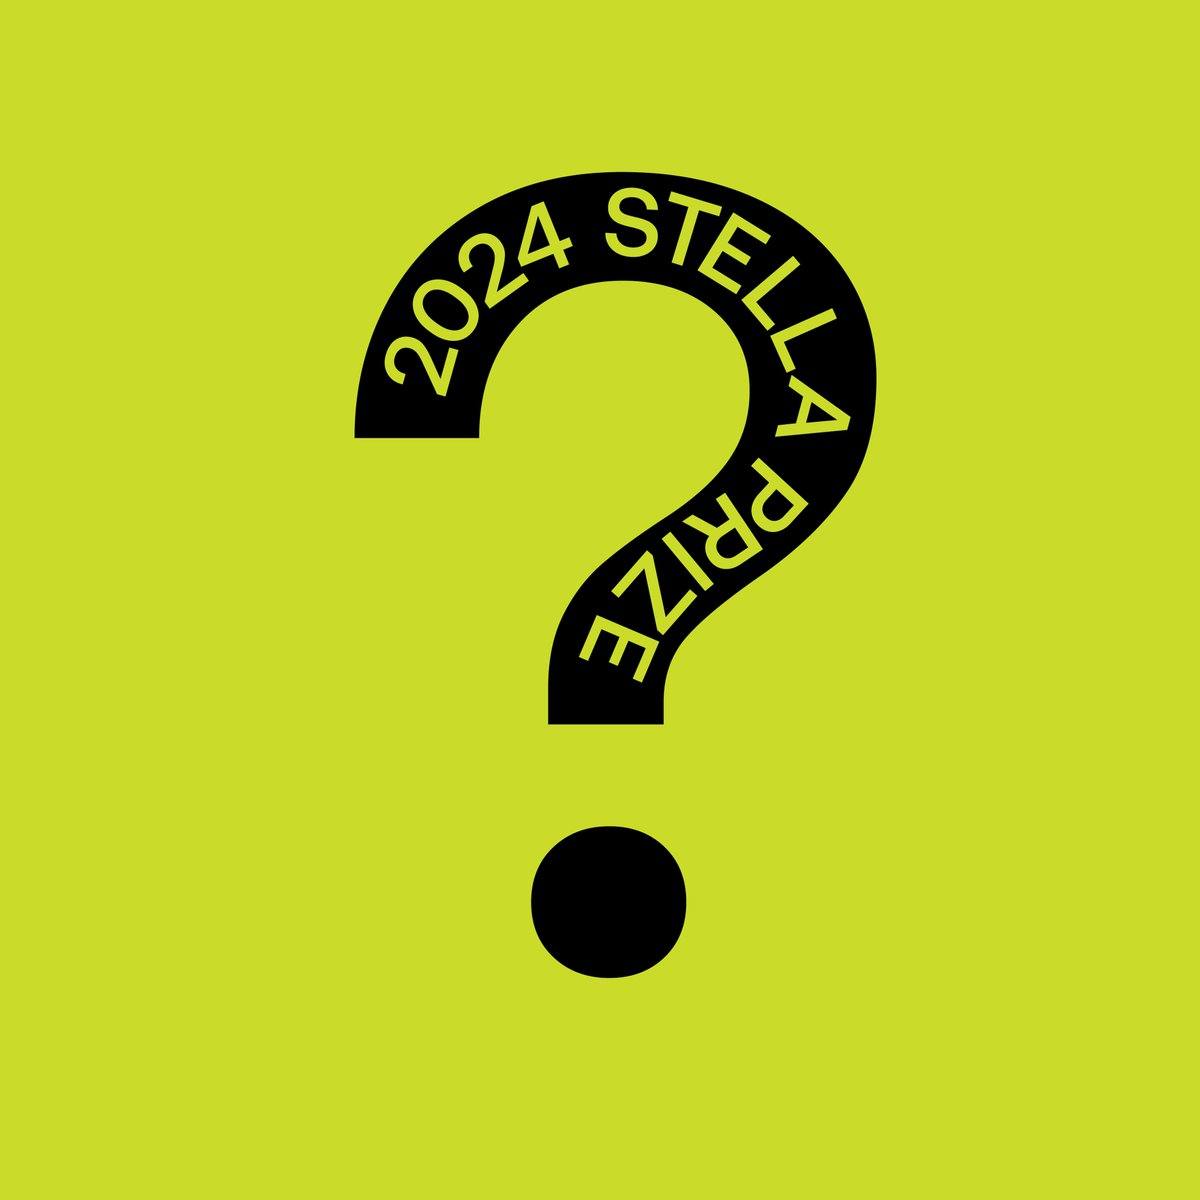 Join us this Thursday 2 May at 7:30pm (AEST) for the #2024stellaprize winner announcement: youtube.com/watch?v=OIENG7… 

Which book do you think will win?